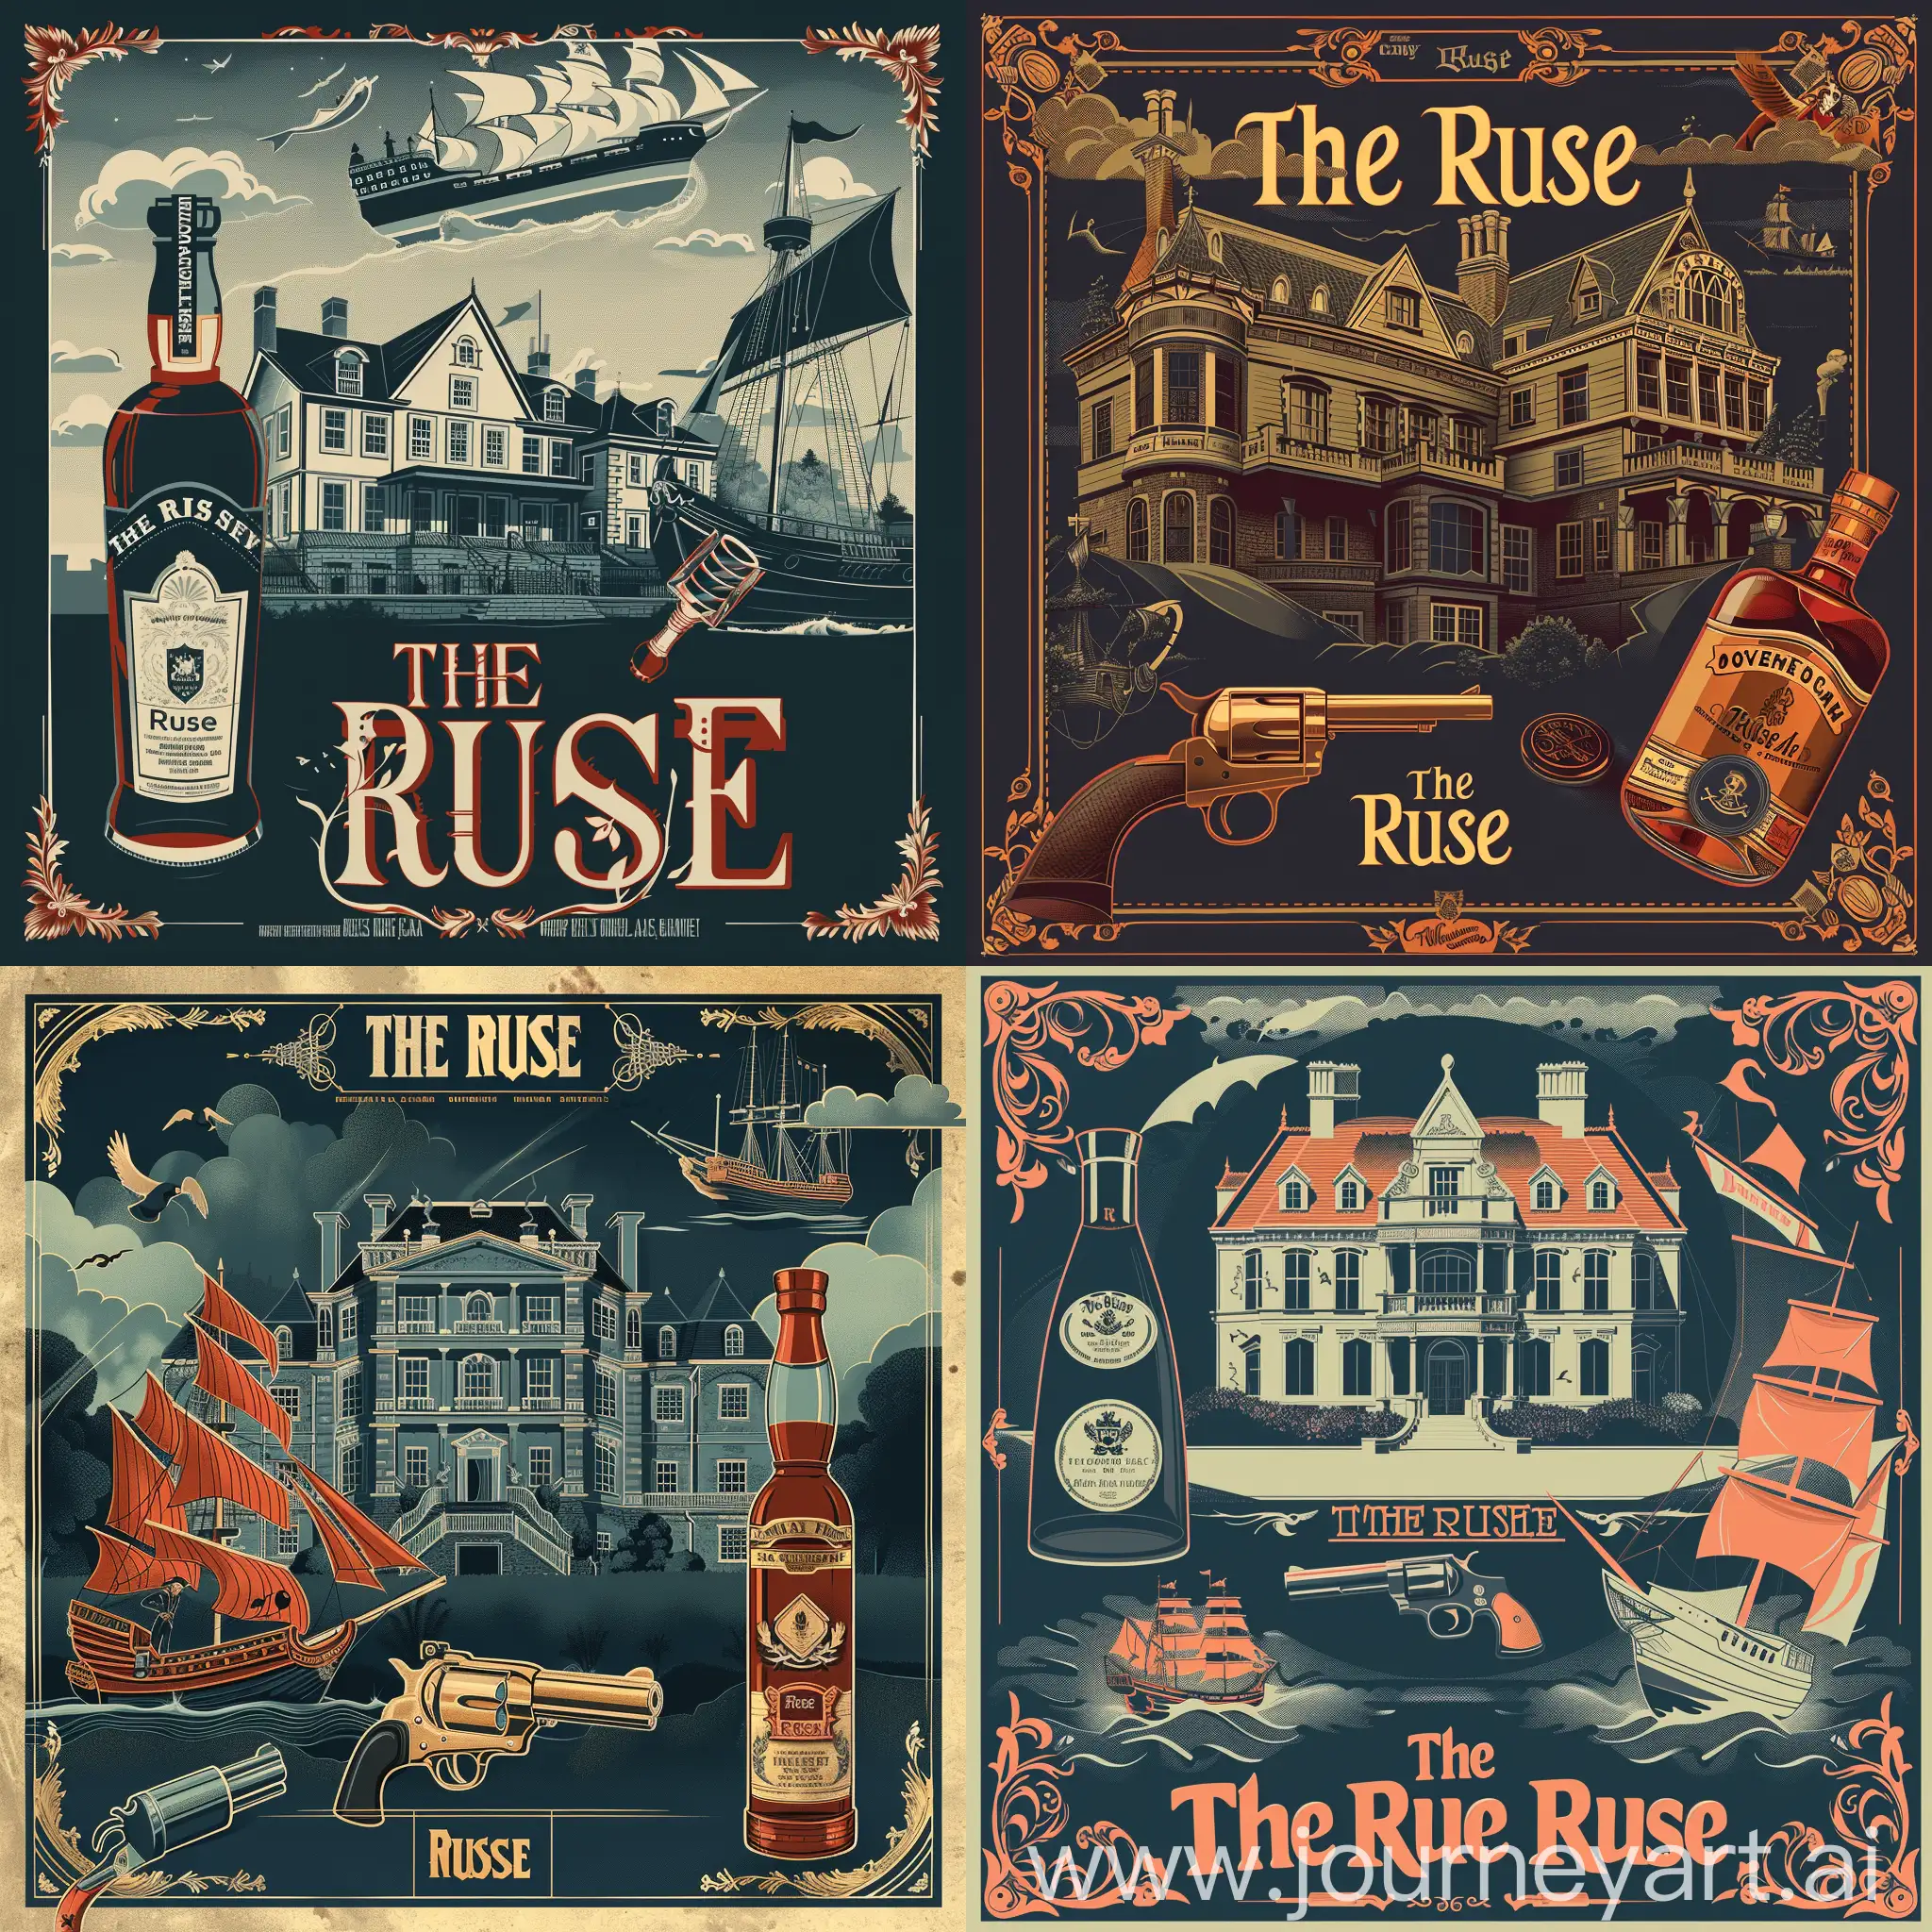 A poster for a comedy thriller play called “The Ruse”. It should be in a 1920’s art deco style featuring a large English Tudor mansion, a pirate ship, a bottle of cognac and a revolver. 